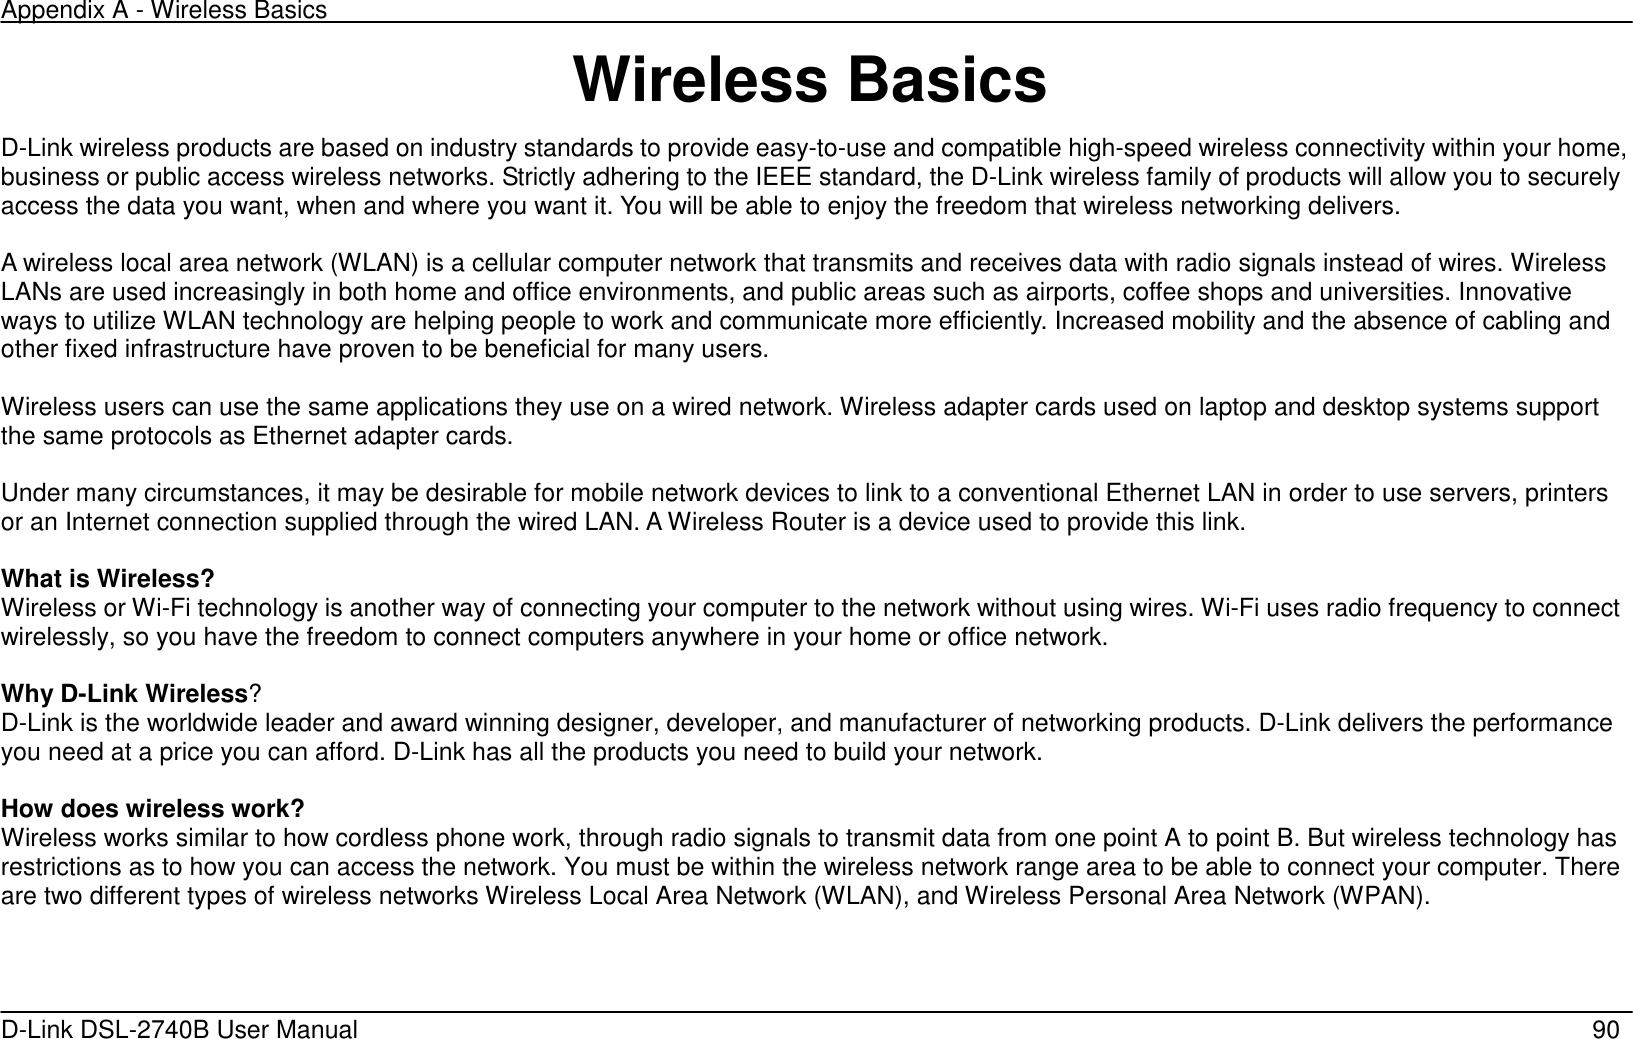 Appendix A - Wireless Basics   D-Link DSL-2740B User Manual                                                  90 Wireless Basics D-Link wireless products are based on industry standards to provide easy-to-use and compatible high-speed wireless connectivity within your home, business or public access wireless networks. Strictly adhering to the IEEE standard, the D-Link wireless family of products will allow you to securely access the data you want, when and where you want it. You will be able to enjoy the freedom that wireless networking delivers.    A wireless local area network (WLAN) is a cellular computer network that transmits and receives data with radio signals instead of wires. Wireless LANs are used increasingly in both home and office environments, and public areas such as airports, coffee shops and universities. Innovative ways to utilize WLAN technology are helping people to work and communicate more efficiently. Increased mobility and the absence of cabling and other fixed infrastructure have proven to be beneficial for many users.  Wireless users can use the same applications they use on a wired network. Wireless adapter cards used on laptop and desktop systems support the same protocols as Ethernet adapter cards.    Under many circumstances, it may be desirable for mobile network devices to link to a conventional Ethernet LAN in order to use servers, printers or an Internet connection supplied through the wired LAN. A Wireless Router is a device used to provide this link.  What is Wireless?   Wireless or Wi-Fi technology is another way of connecting your computer to the network without using wires. Wi-Fi uses radio frequency to connect wirelessly, so you have the freedom to connect computers anywhere in your home or office network.  Why D-Link Wireless? D-Link is the worldwide leader and award winning designer, developer, and manufacturer of networking products. D-Link delivers the performance you need at a price you can afford. D-Link has all the products you need to build your network.  How does wireless work? Wireless works similar to how cordless phone work, through radio signals to transmit data from one point A to point B. But wireless technology has restrictions as to how you can access the network. You must be within the wireless network range area to be able to connect your computer. There are two different types of wireless networks Wireless Local Area Network (WLAN), and Wireless Personal Area Network (WPAN).  